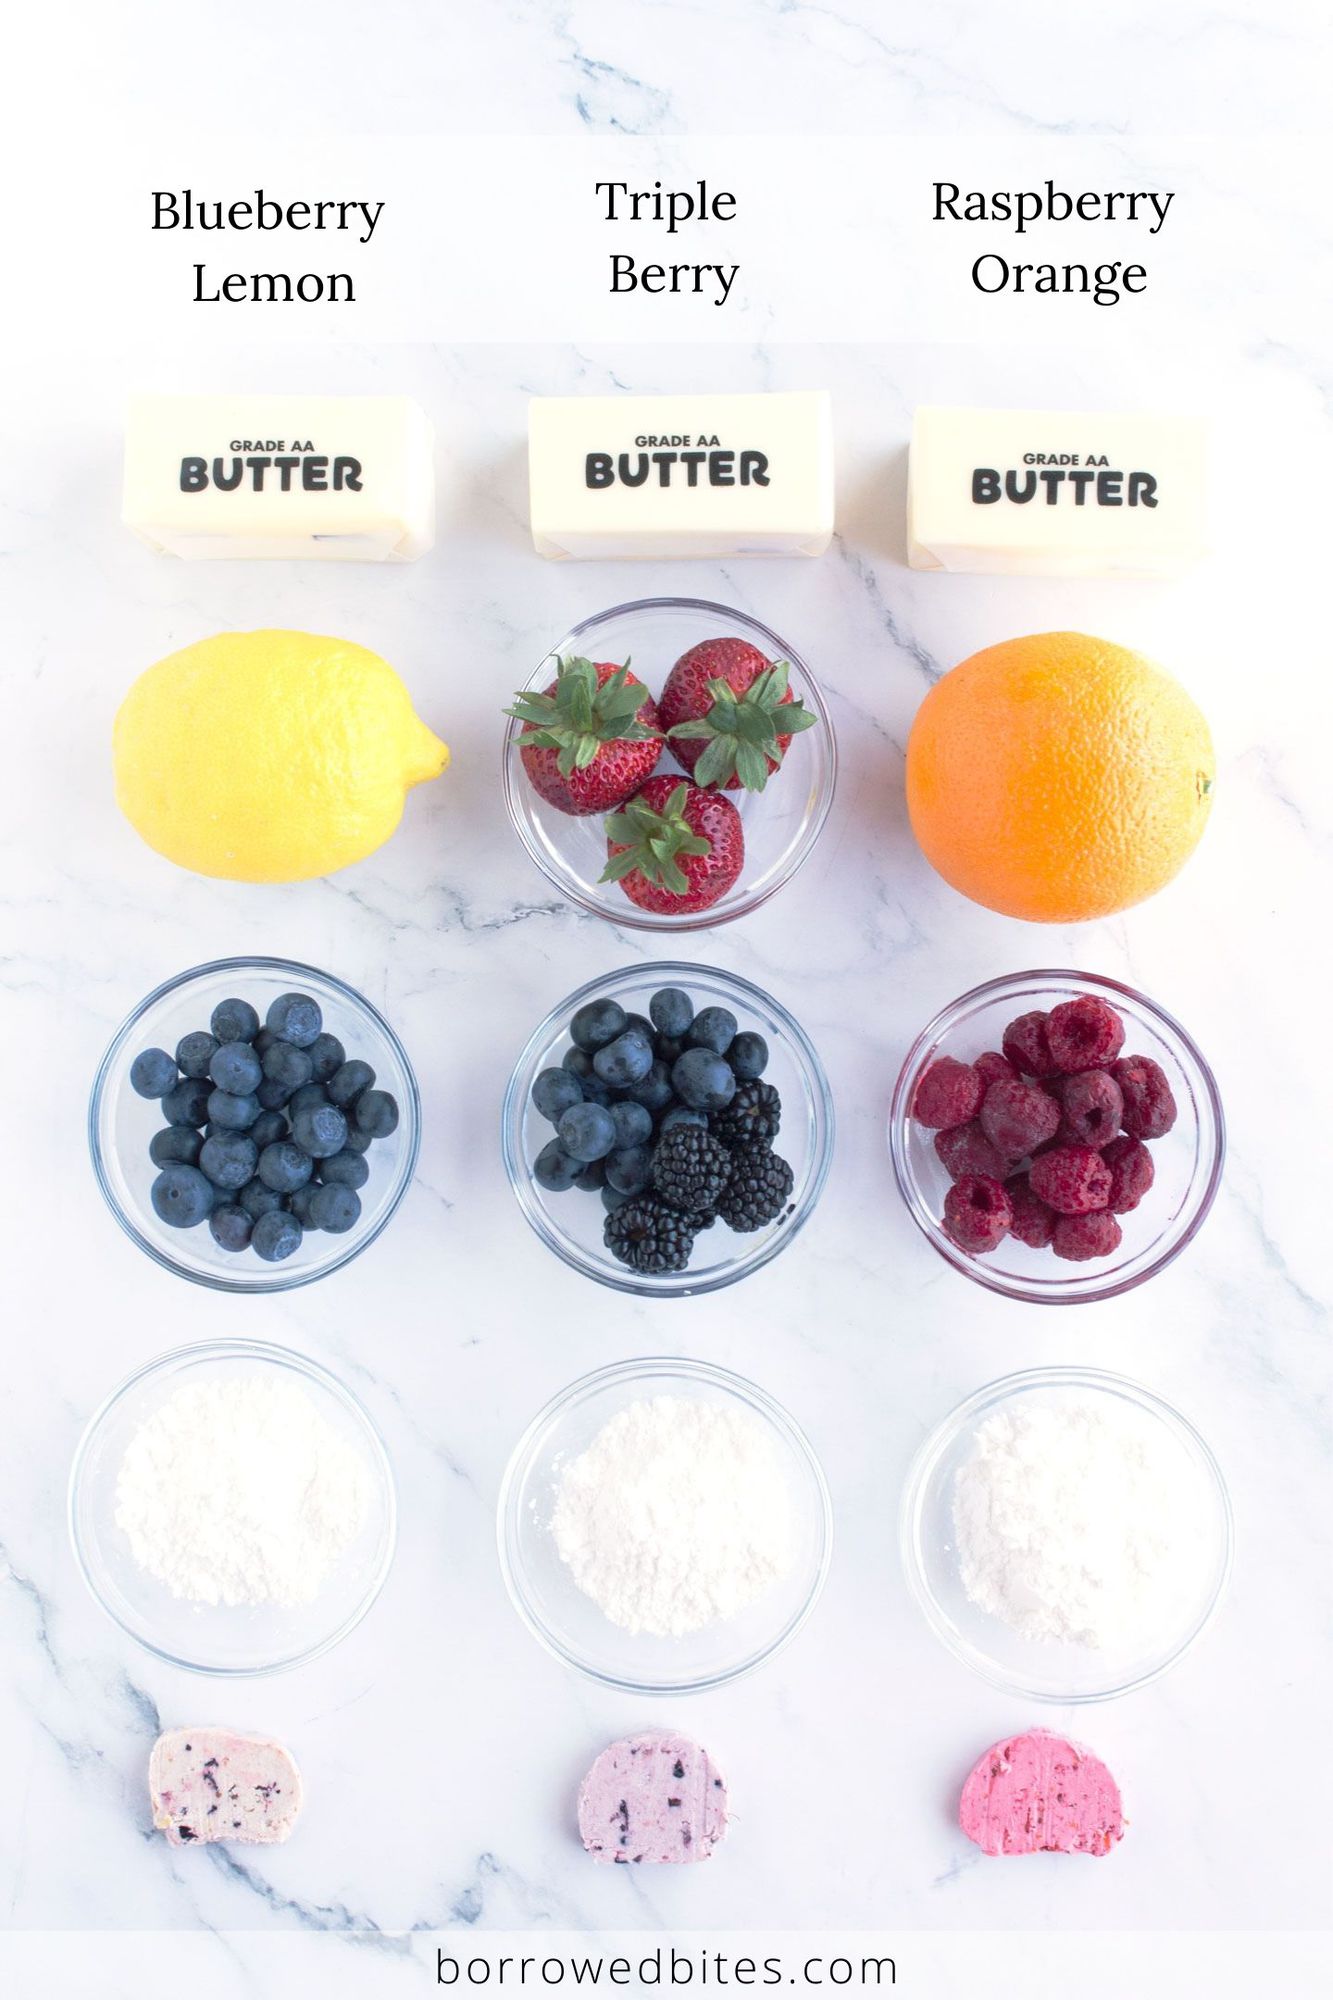 Ingredients for sweet flavored butter with text overlay.